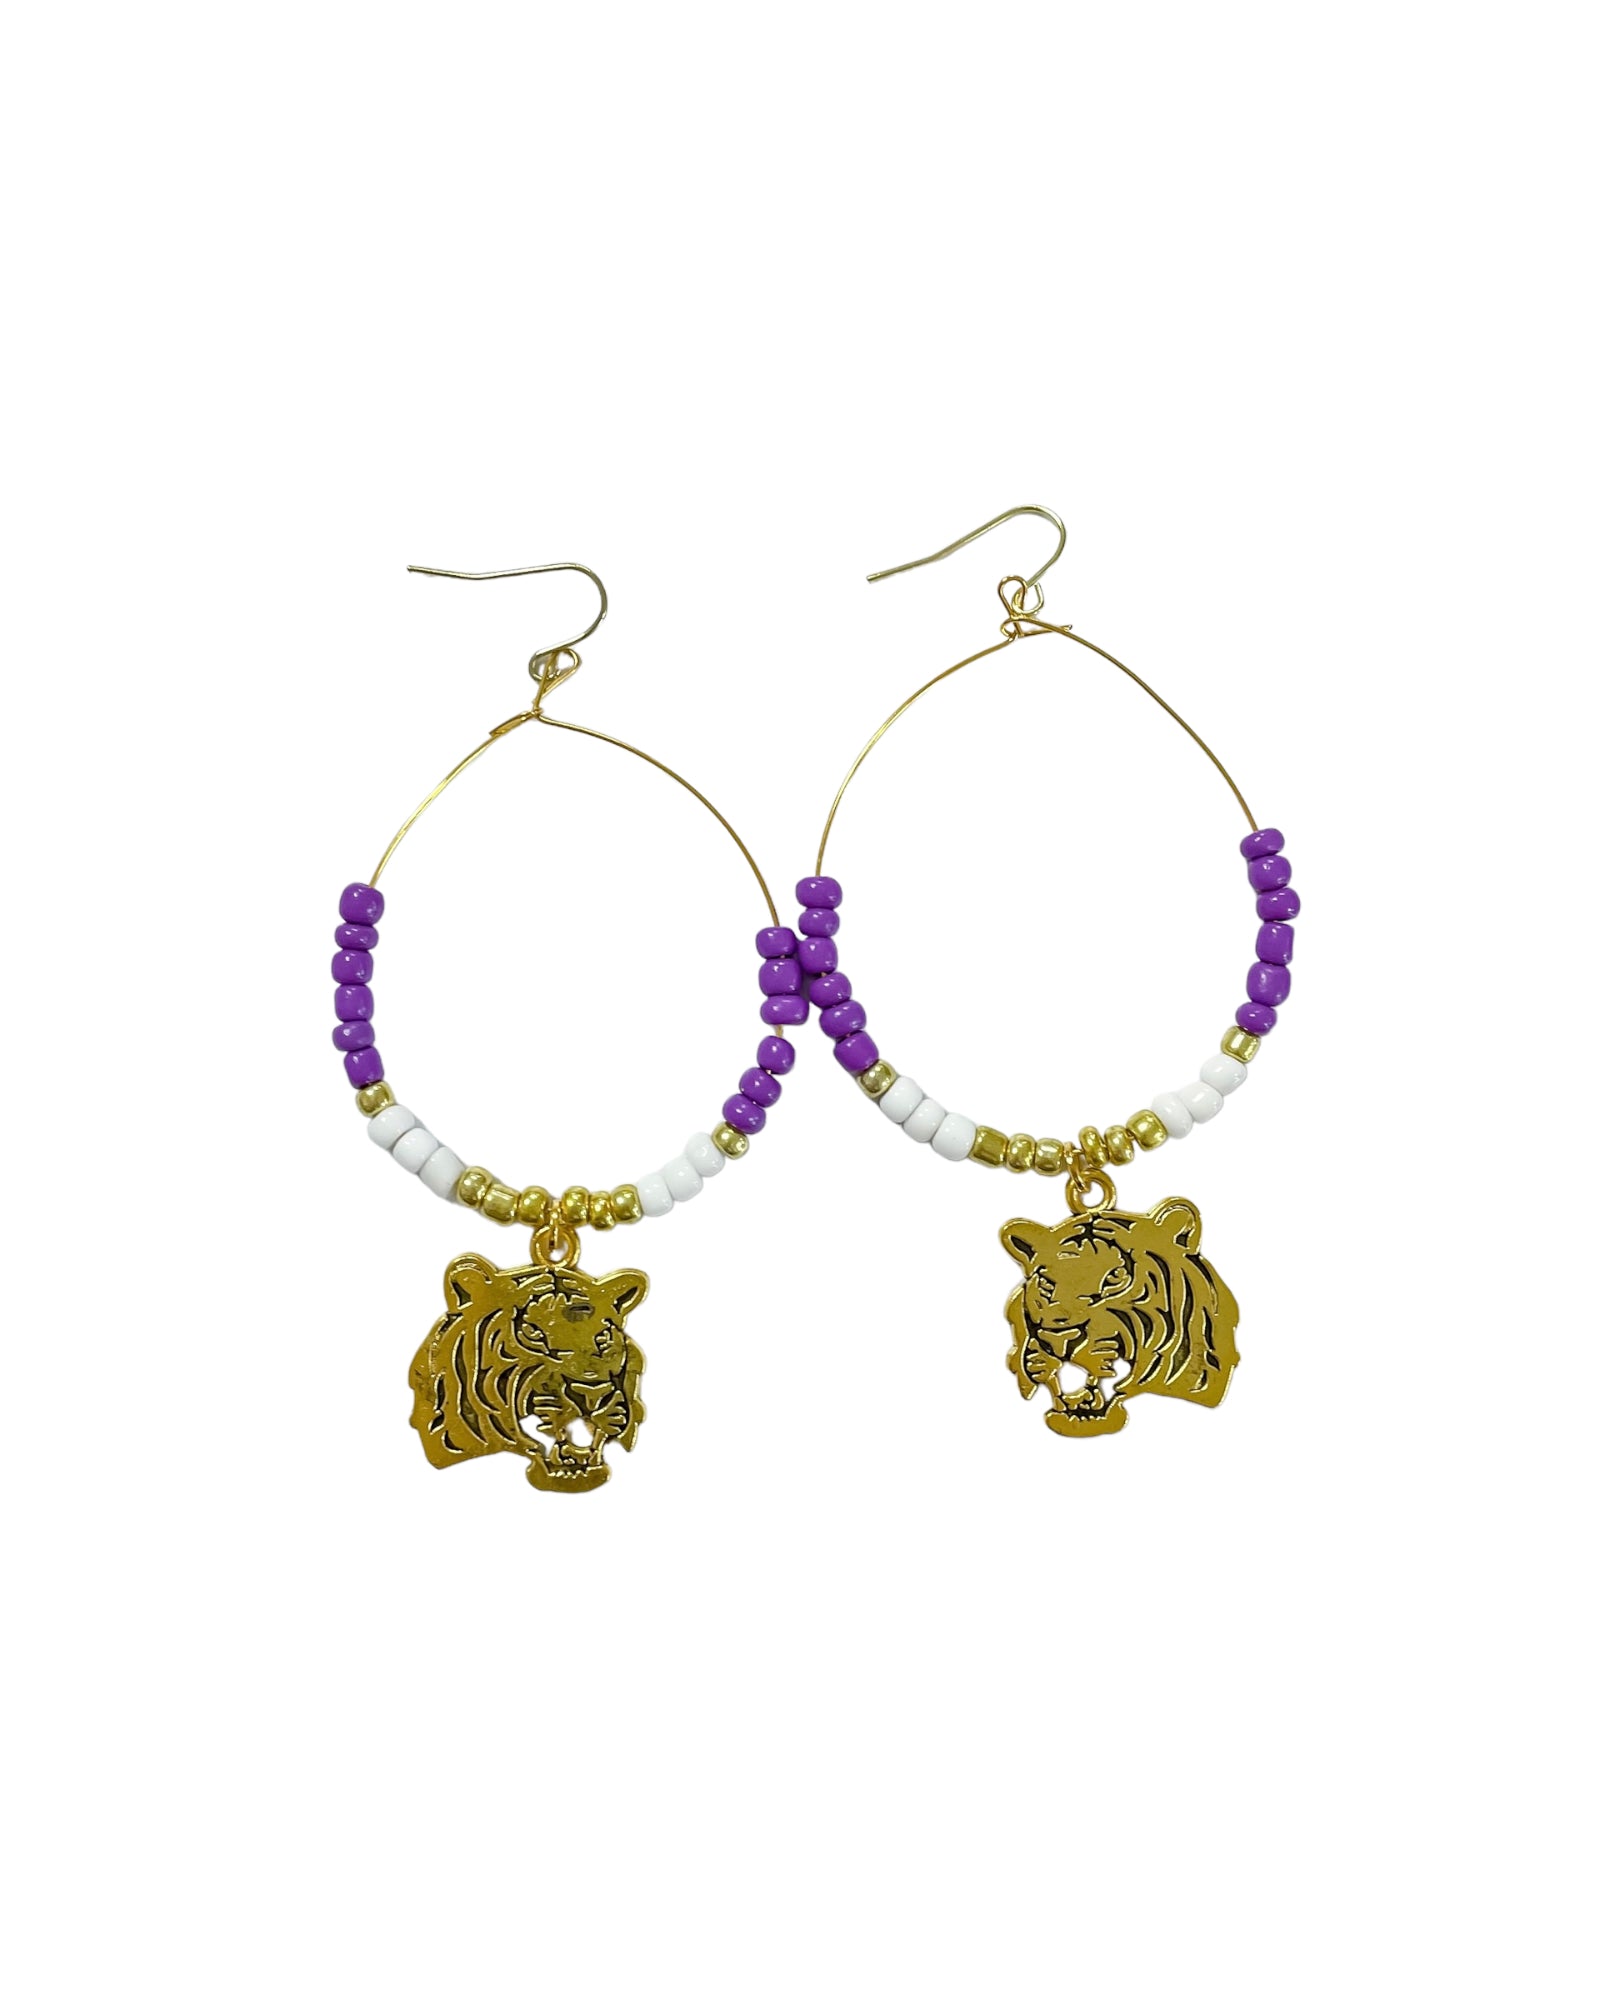 boutique shopping pensacola tailgate lsu louisiana tigers hoop earrings jewelry accessories beaded college football game day